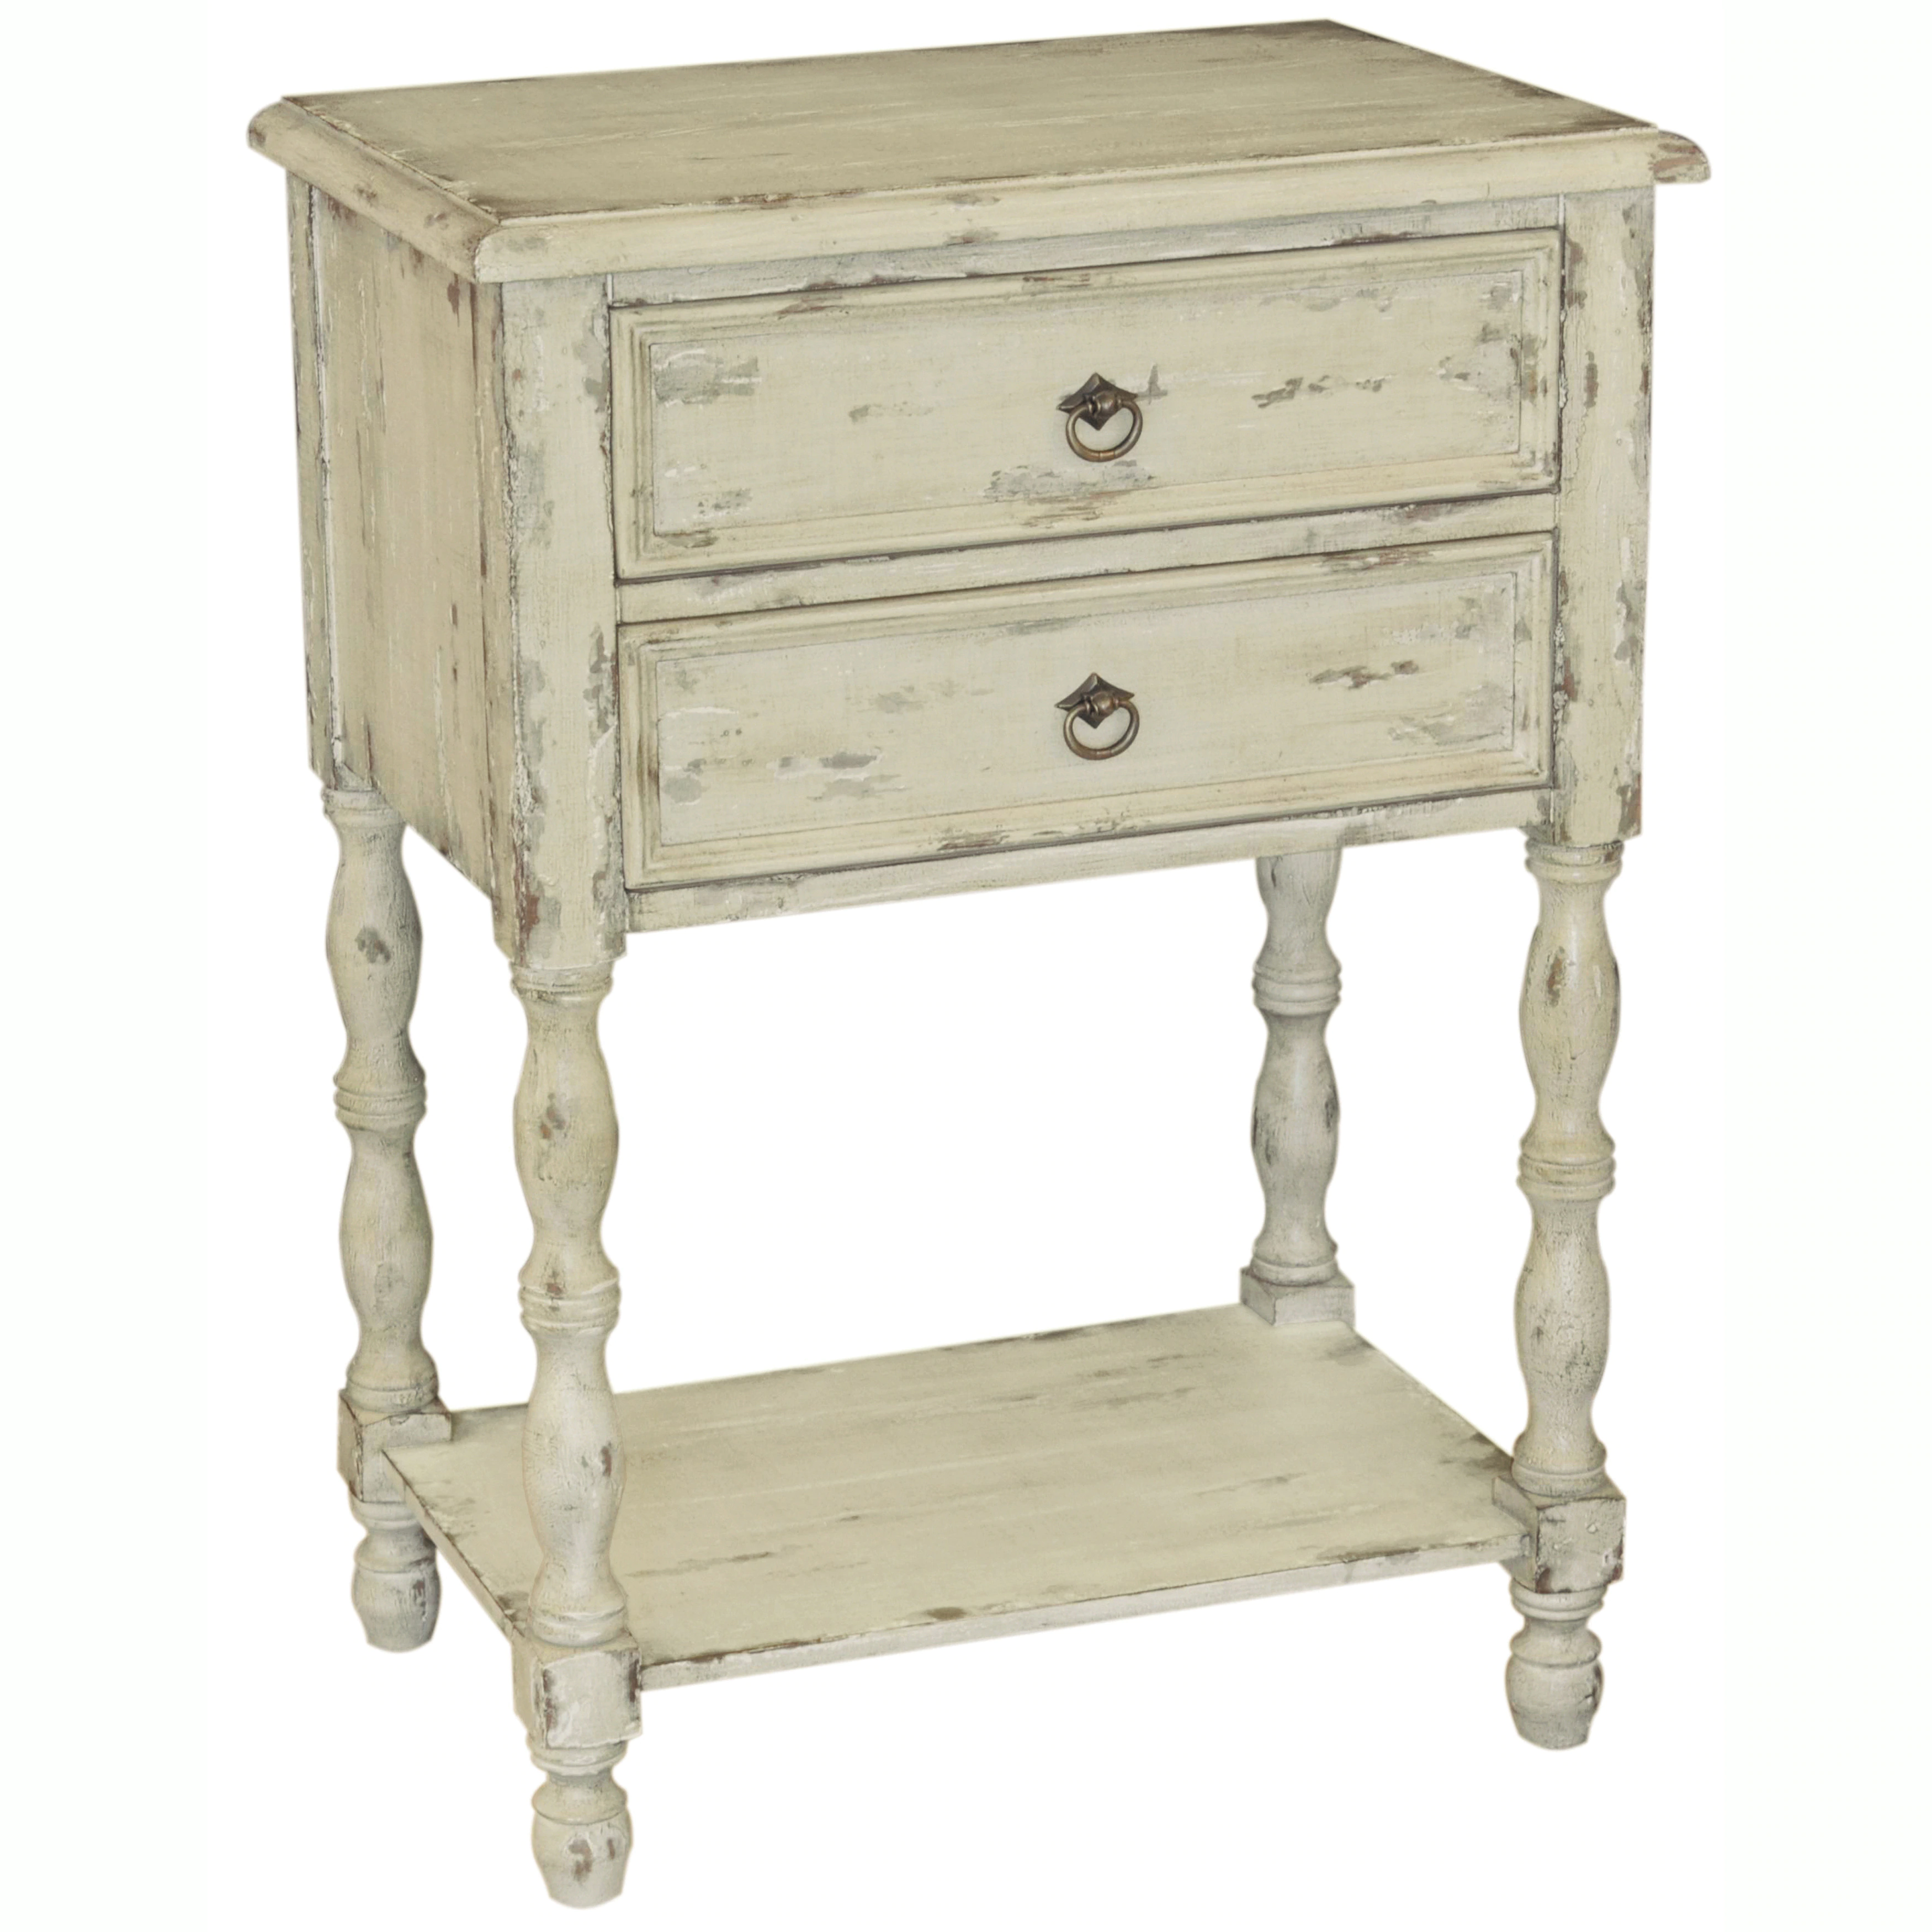 hand painted distressed antique ivory finish accent table chest free shipping today drop leaf dinette sets round pedestal black bedside with drawers oversized modern coffee drum